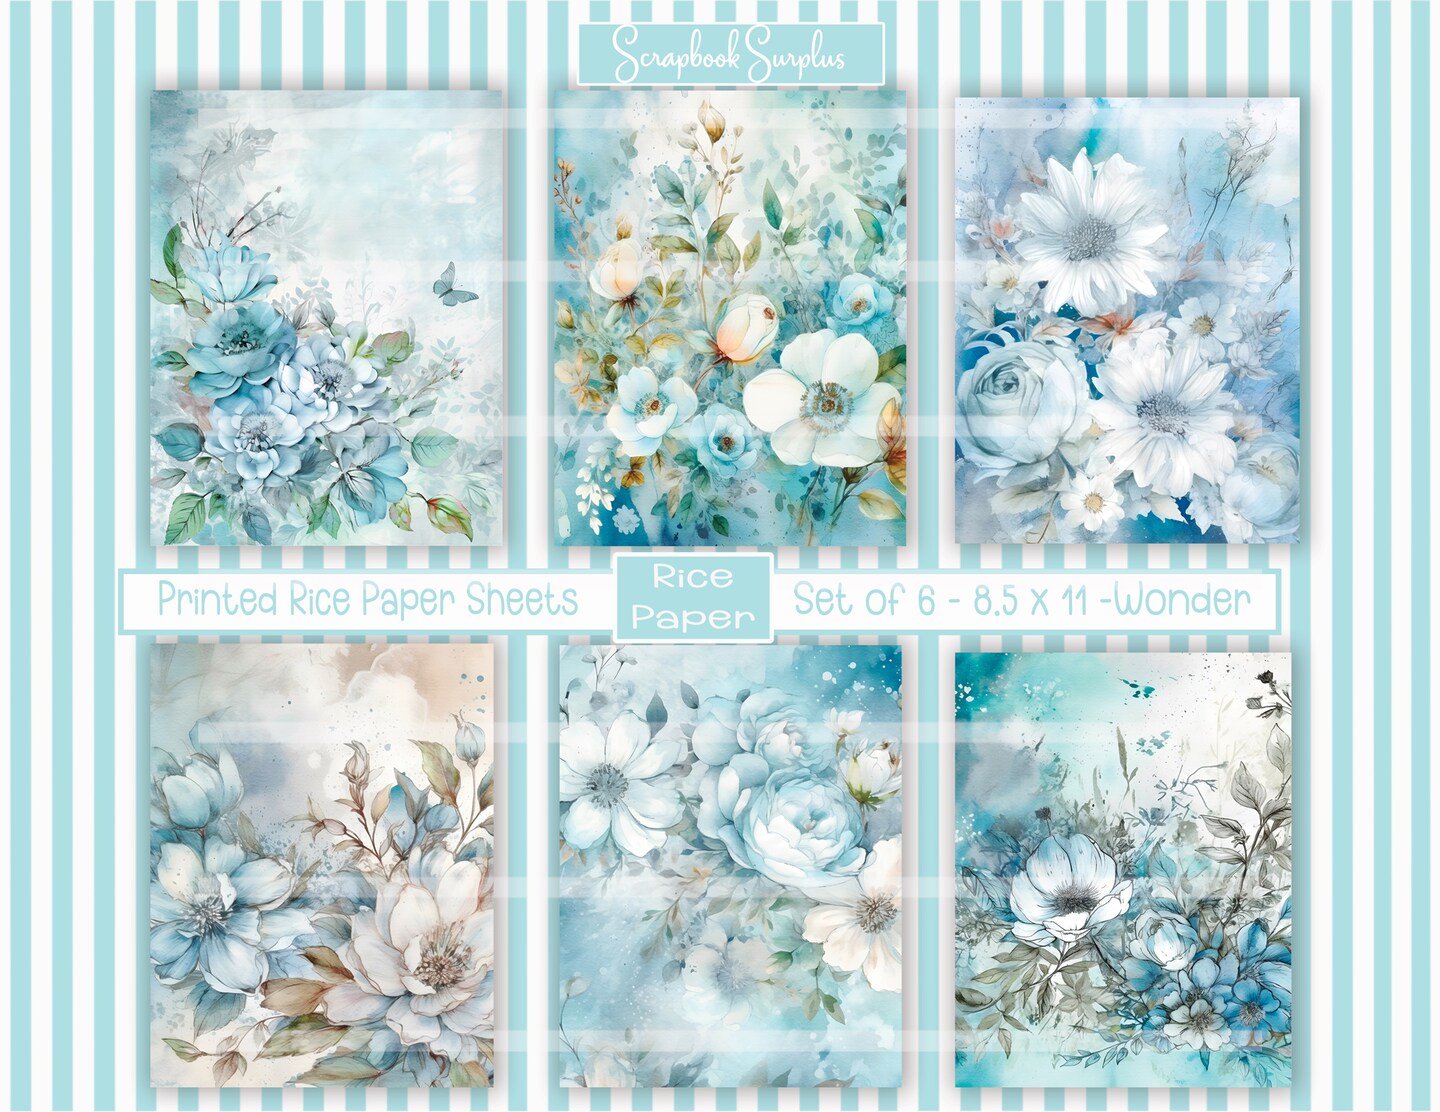 Decoupage Rice Paper Printed Sheets - Set of 6 - 8.5 x 11